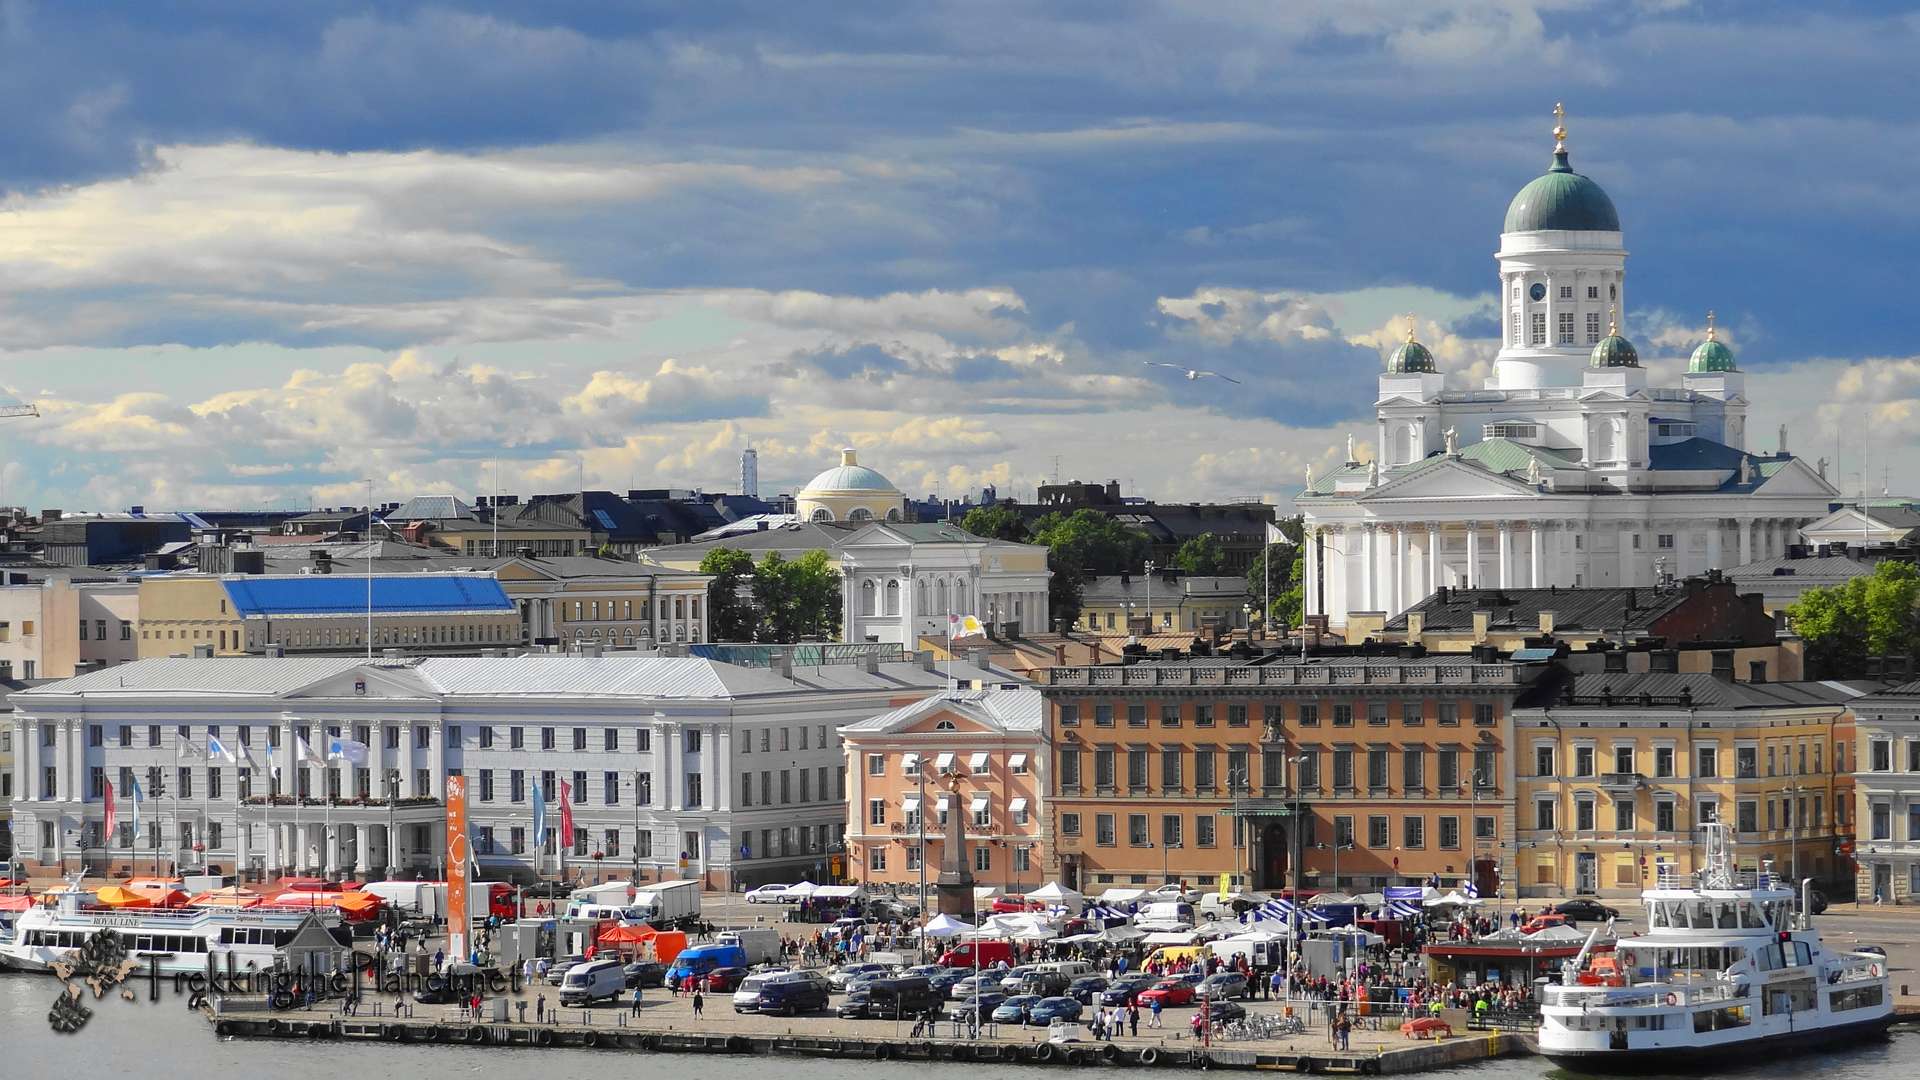 Helsinki Finland Picture and videos and news